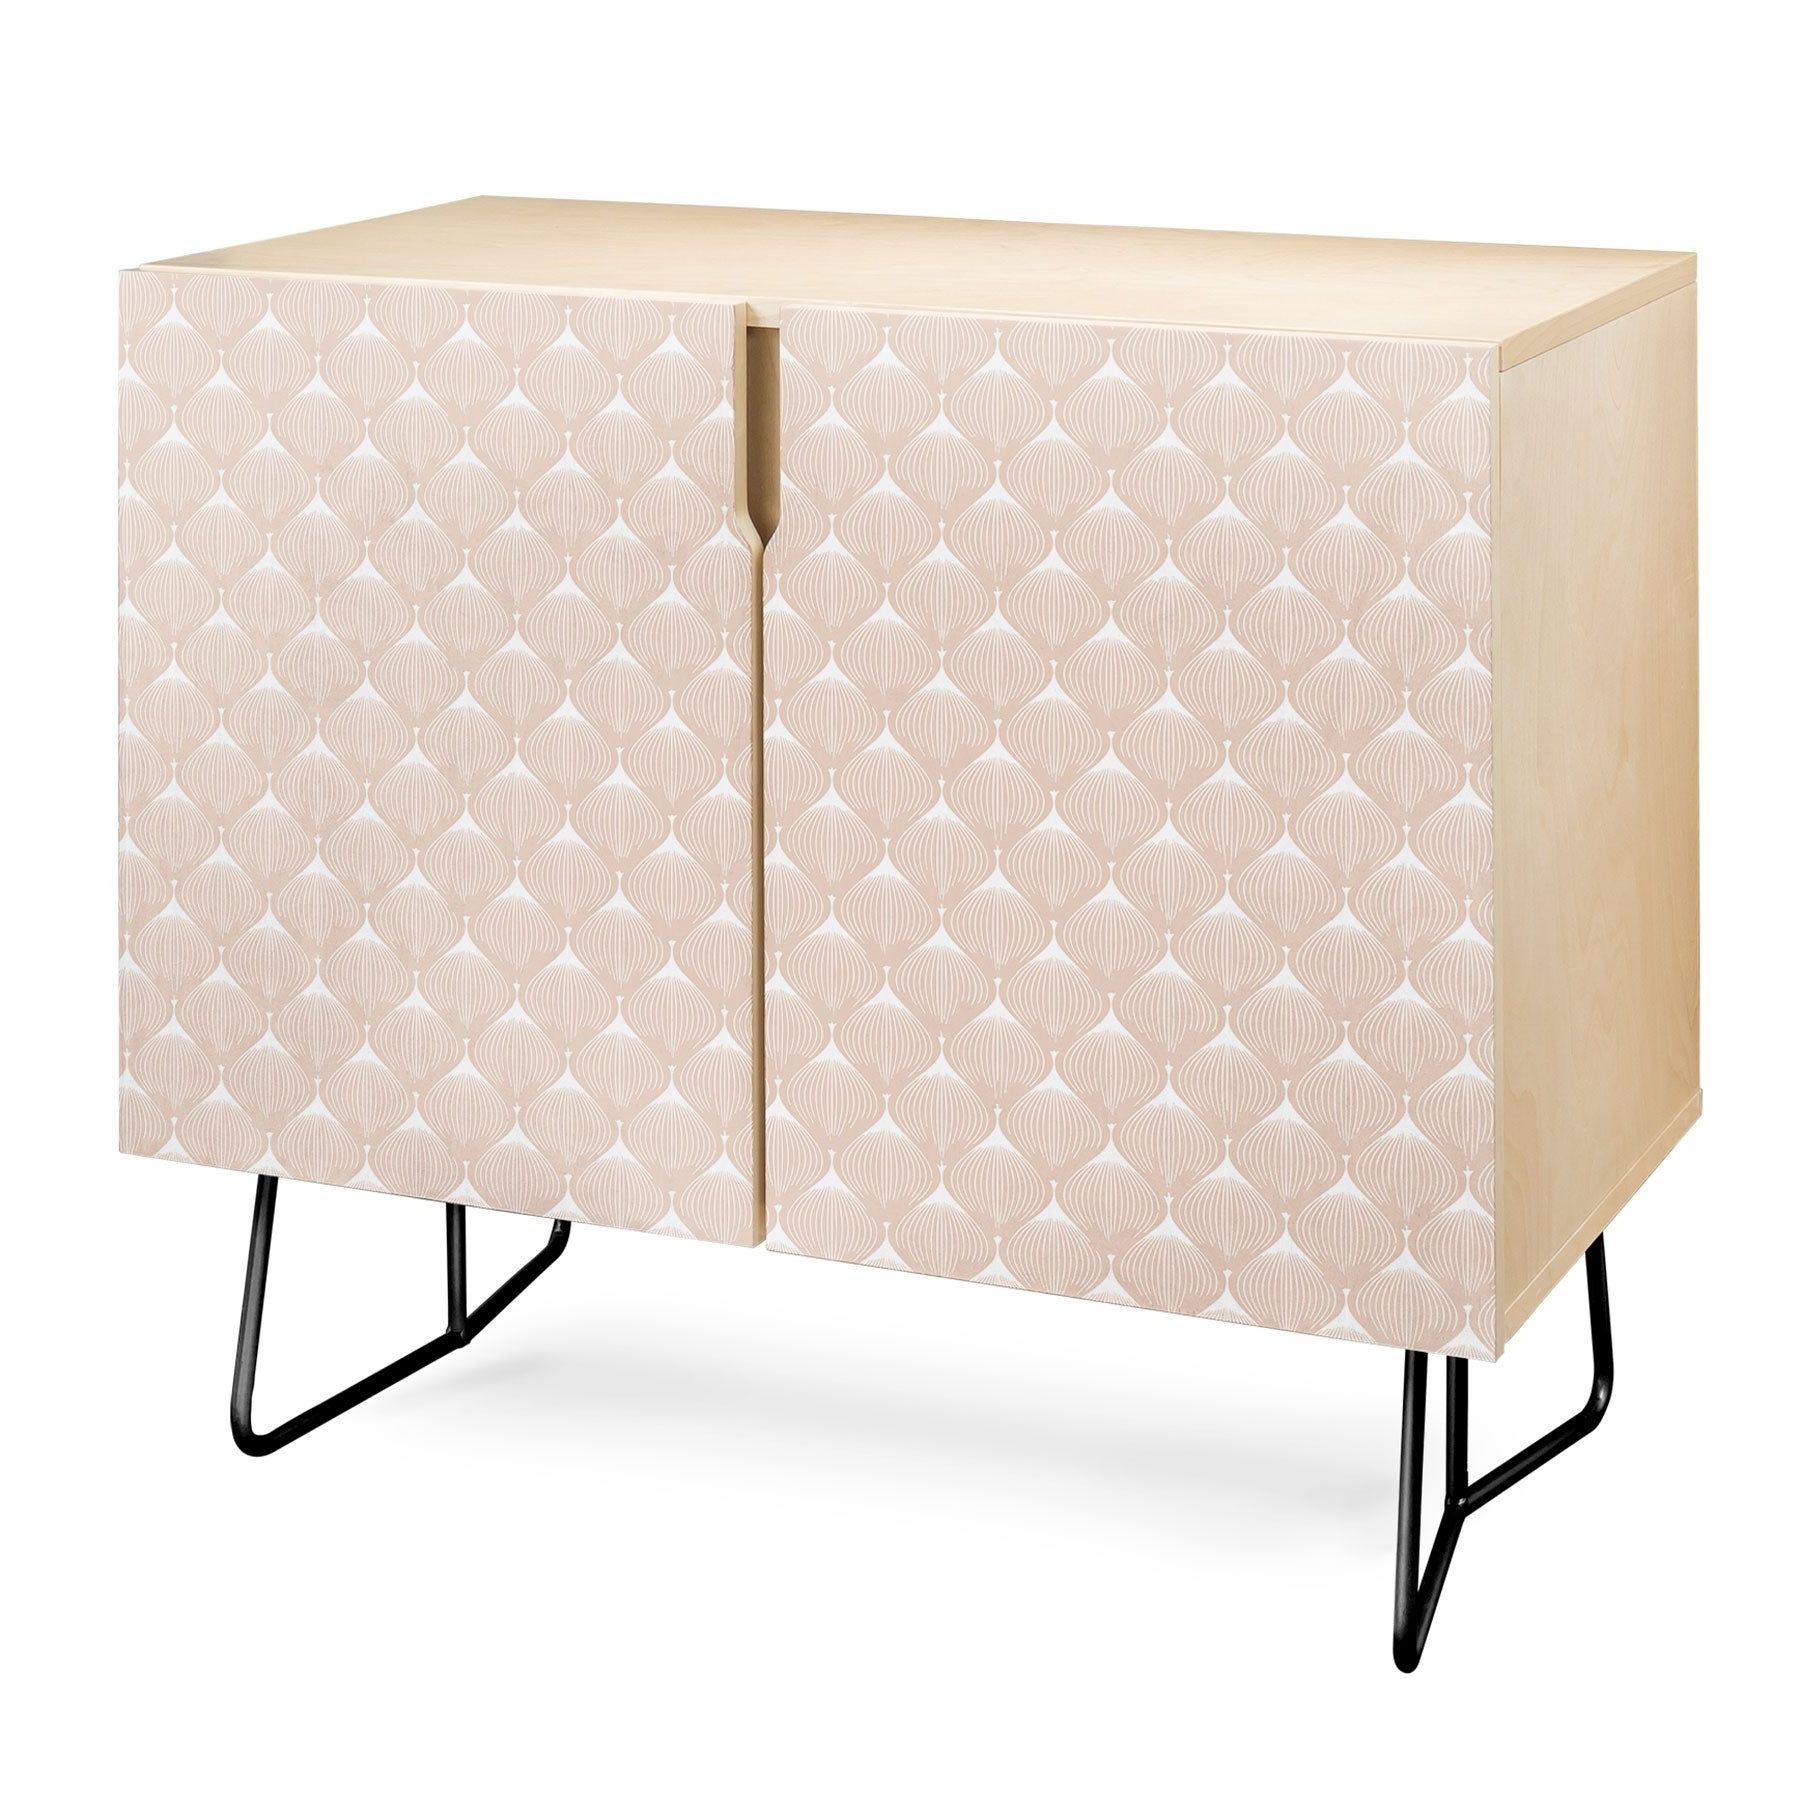 Deny Designs Pale Pink Bulbs Credenza (birch Or Walnut, 2 Leg Options) Pertaining To Pale Pink Bulbs Credenzas (View 4 of 20)